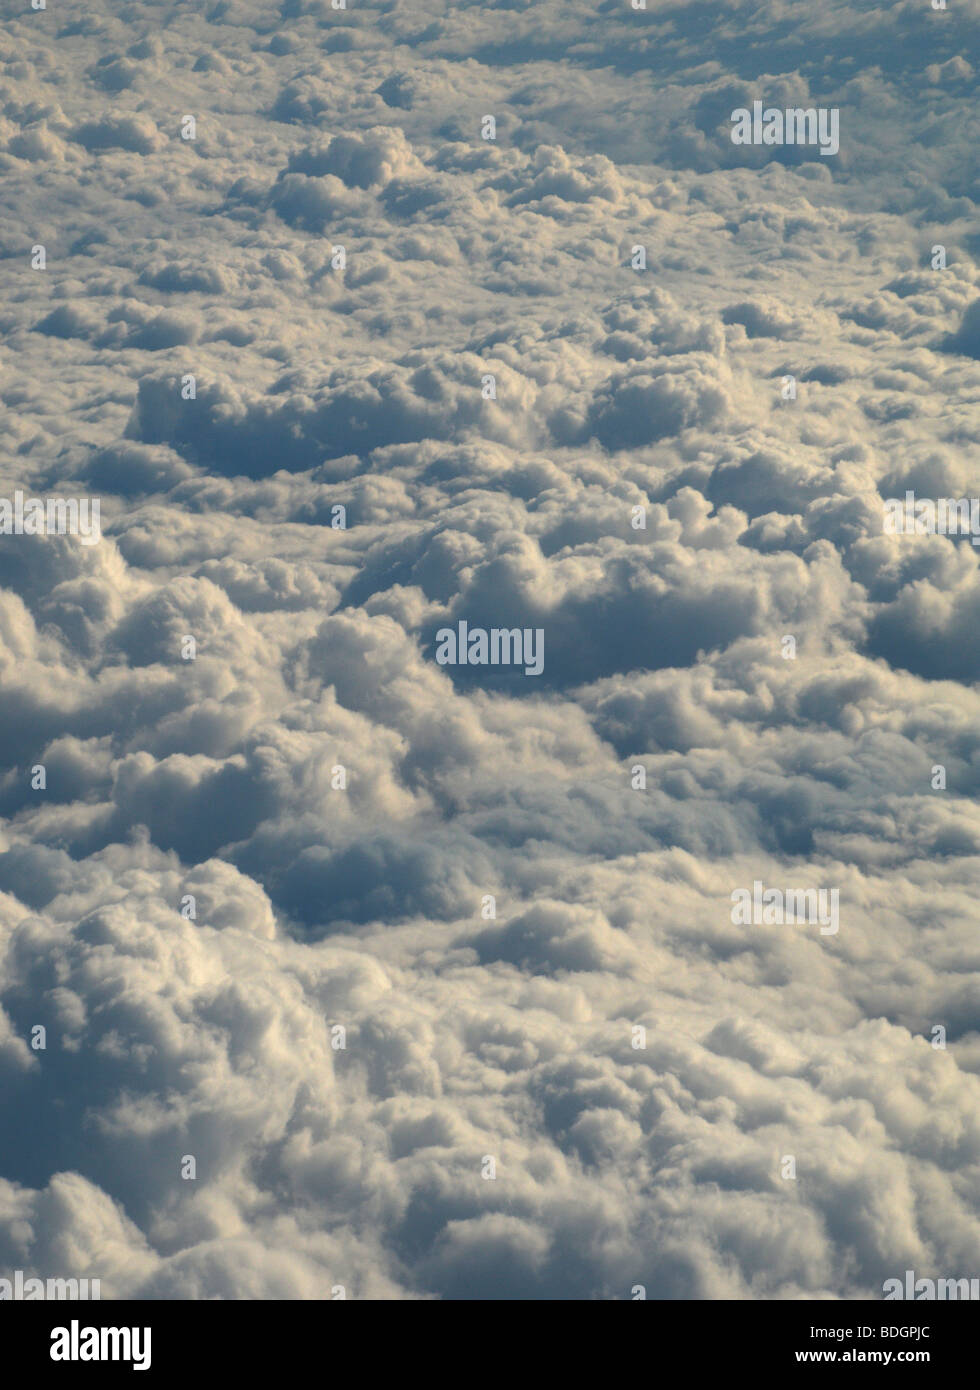 Early morning sunlight hitting a blanket of clouds shot from above Stock Photo